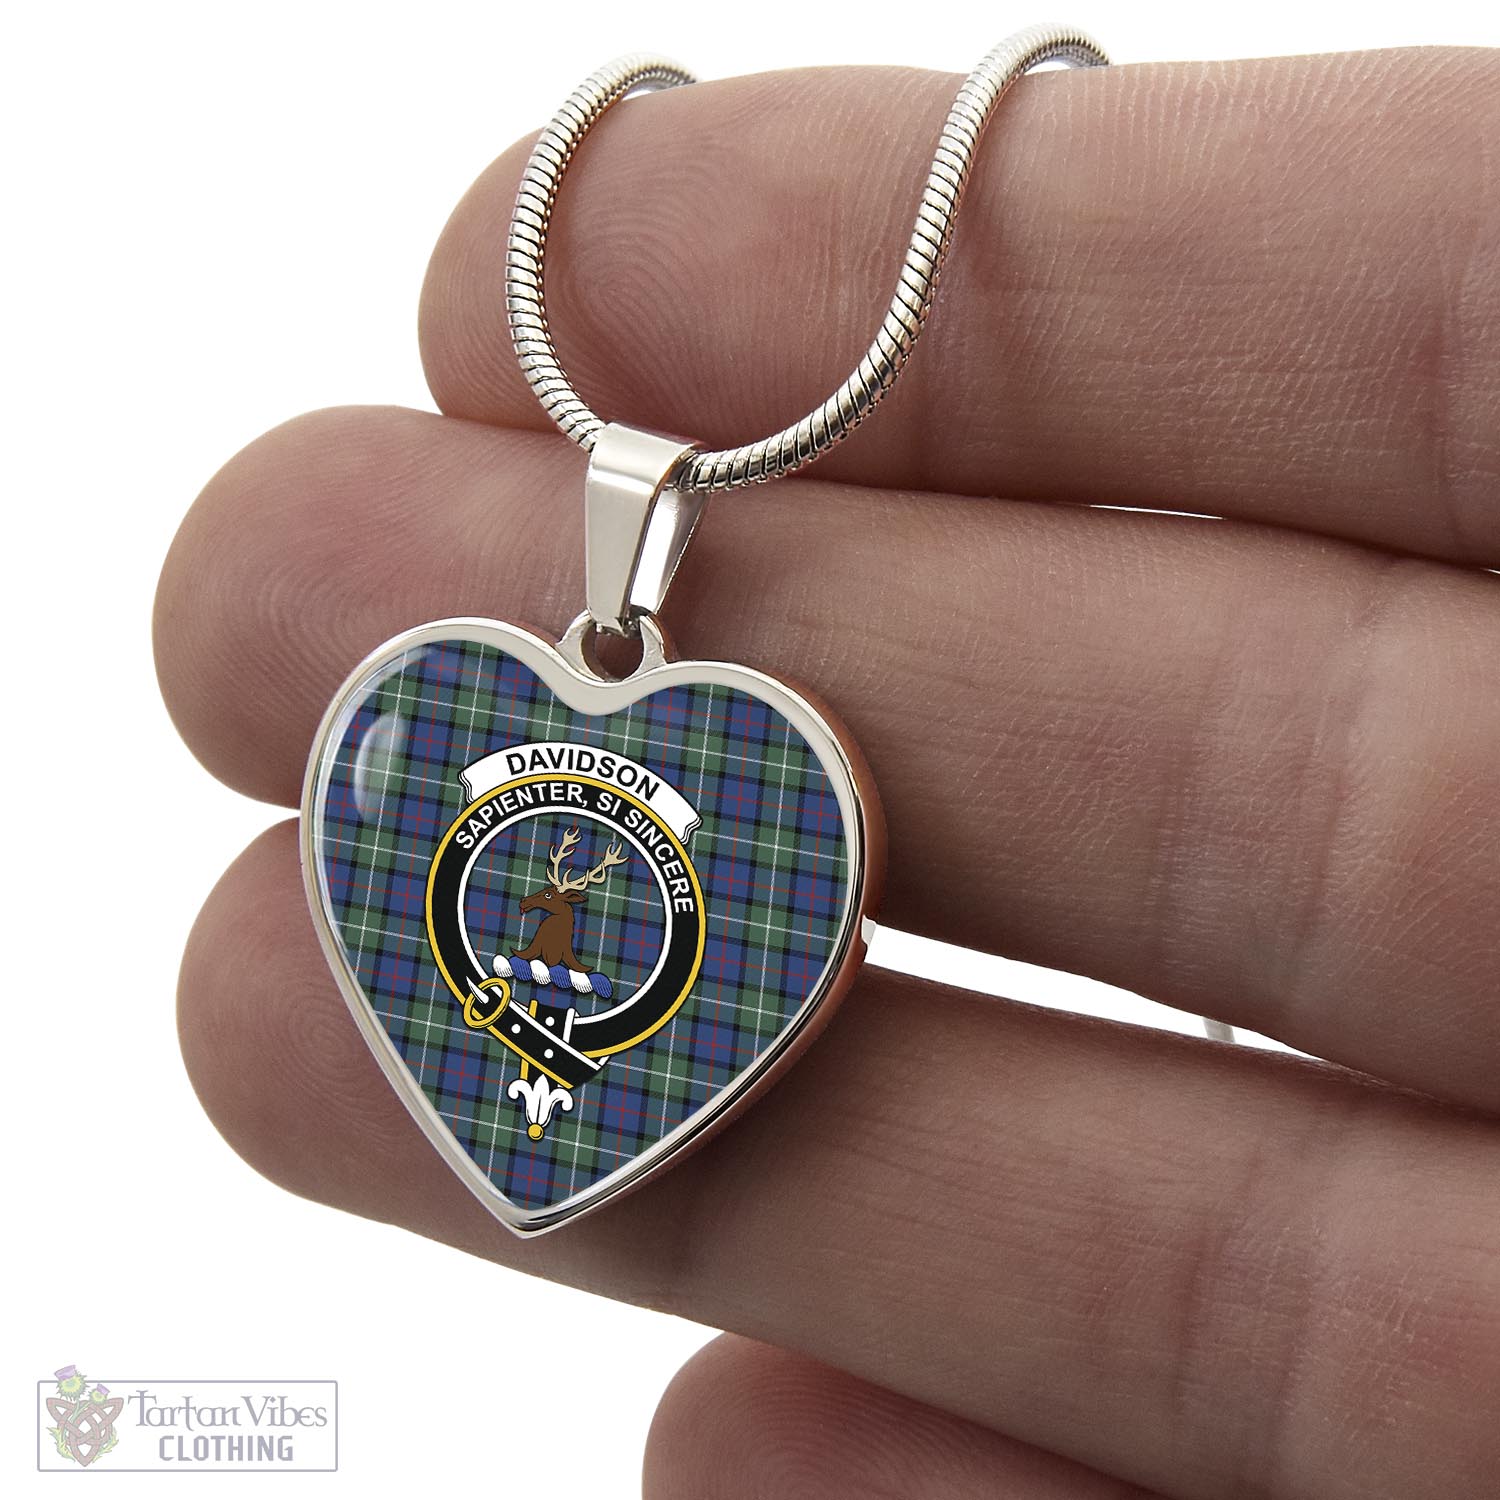 Tartan Vibes Clothing Davidson of Tulloch Tartan Heart Necklace with Family Crest